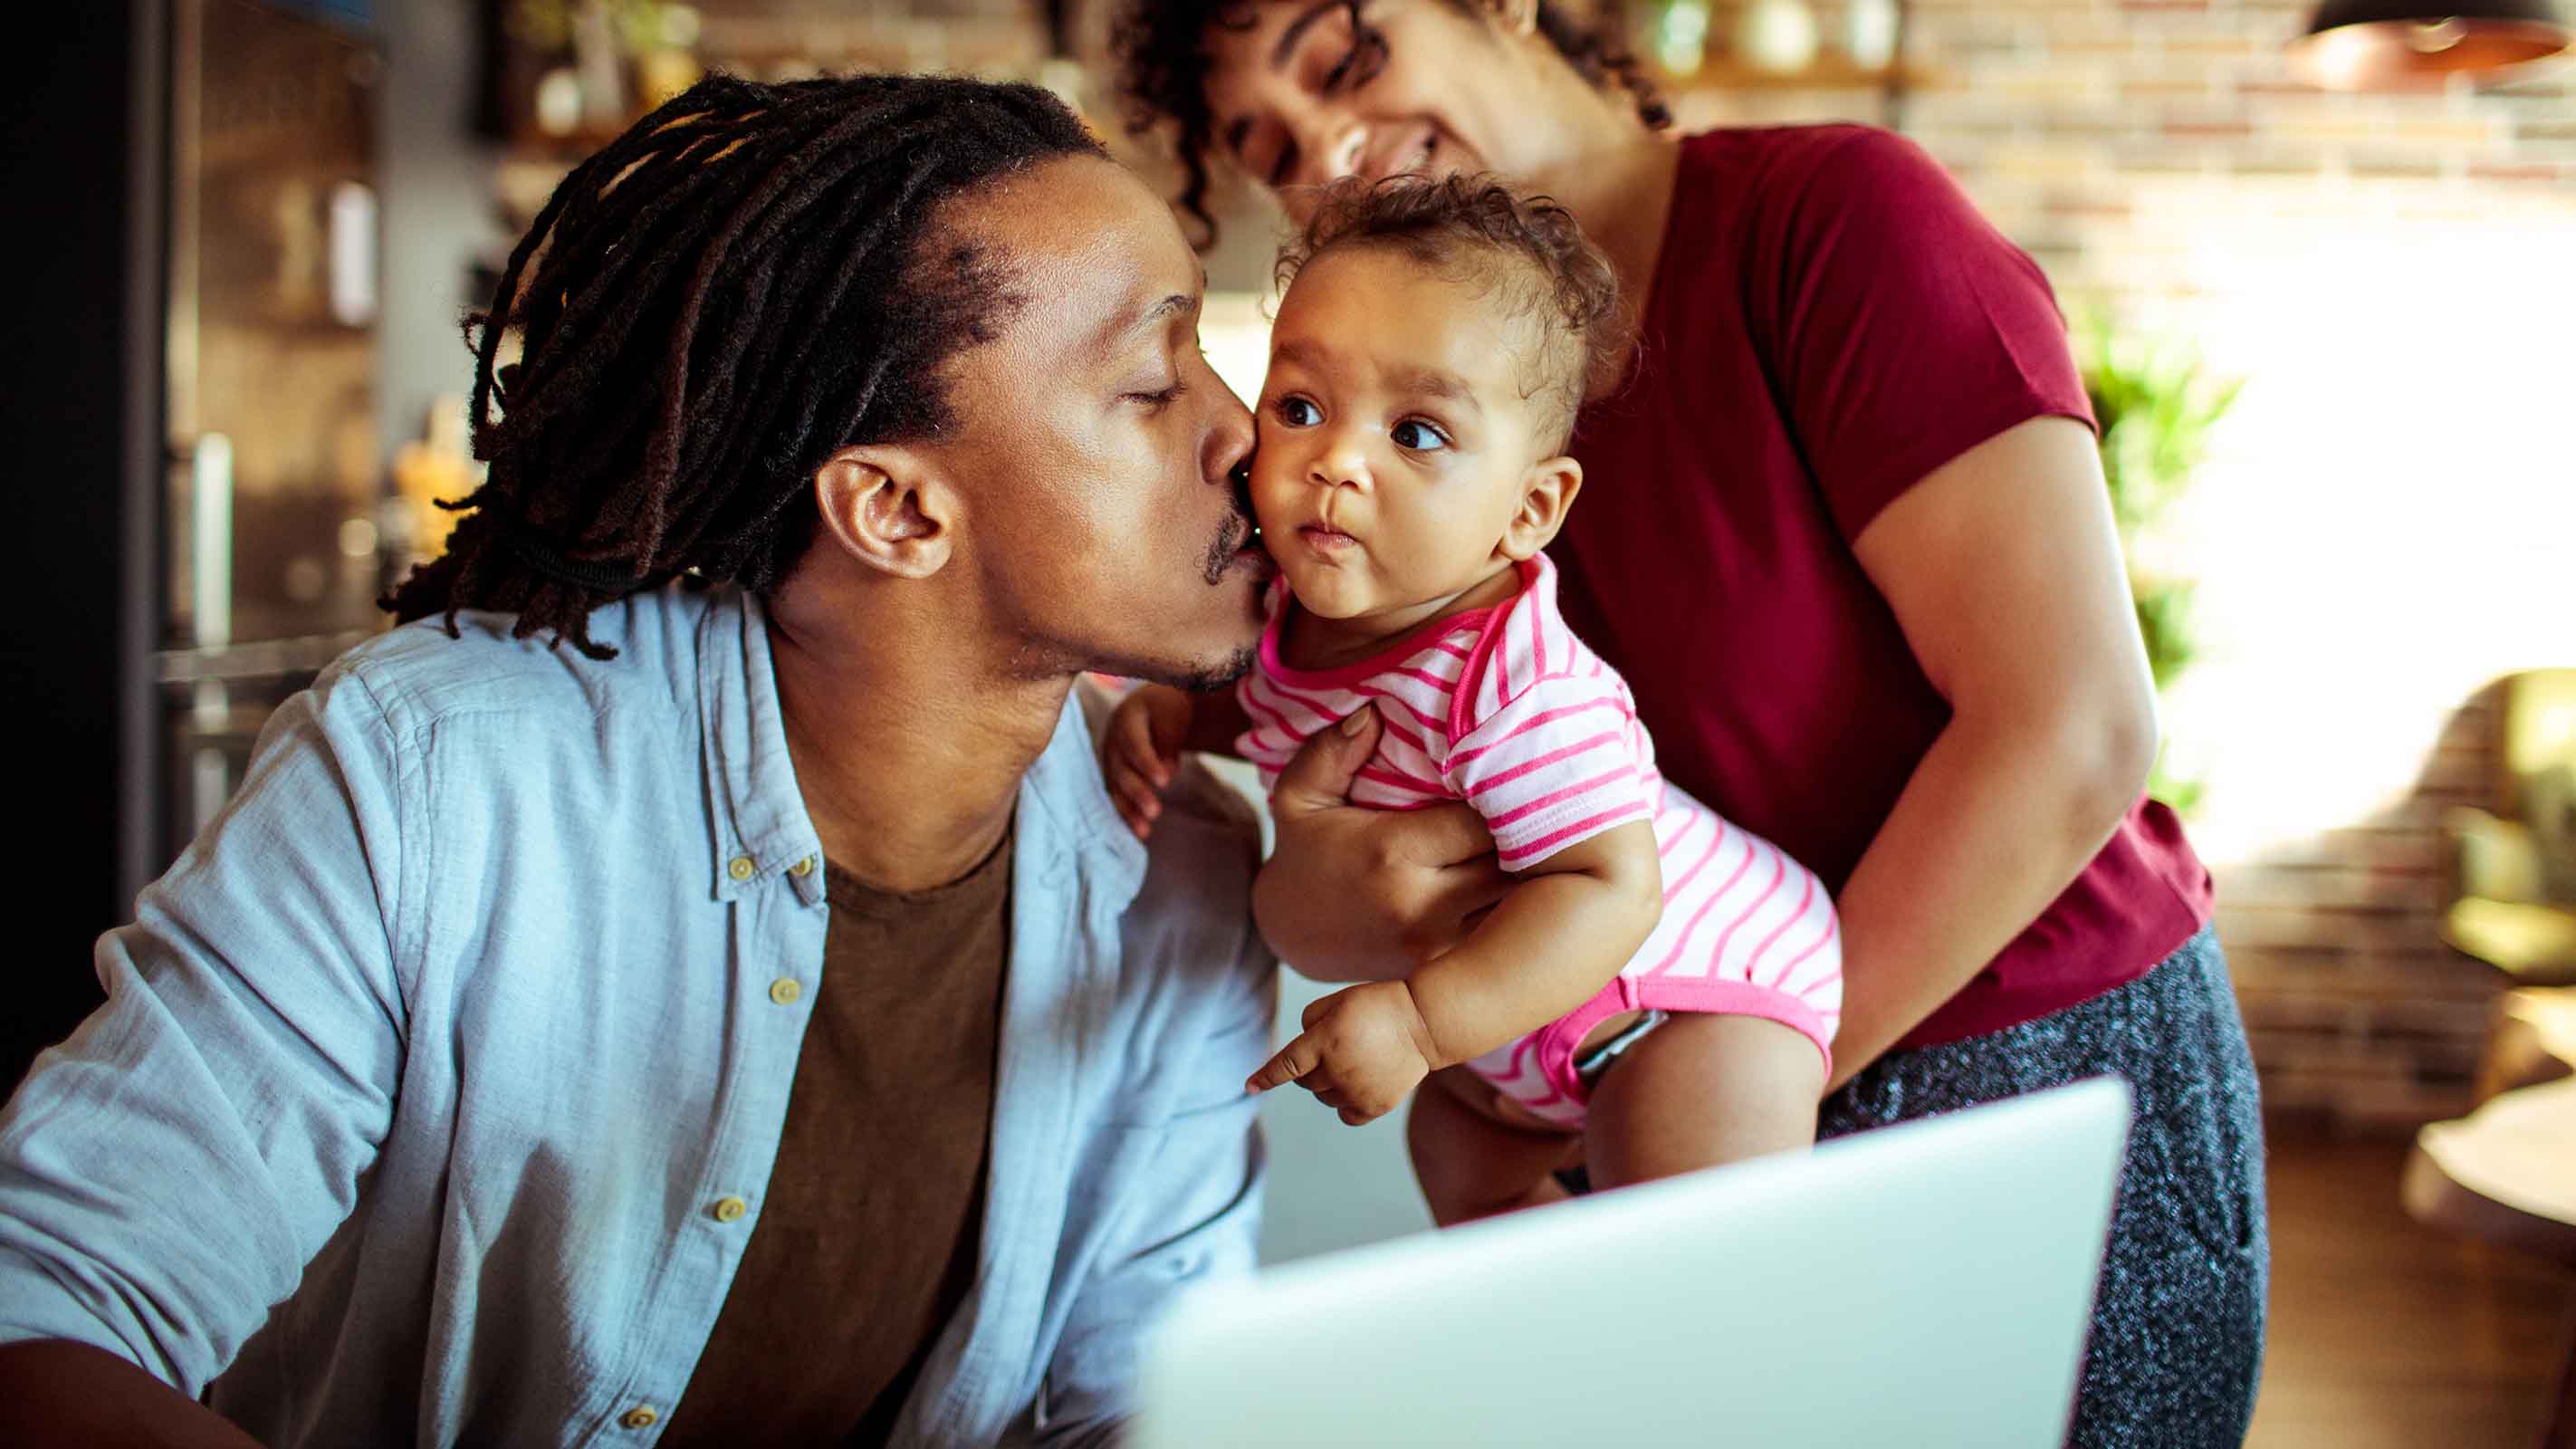 A father leans away from his laptop to kiss his baby daughter while she's held by her mother.